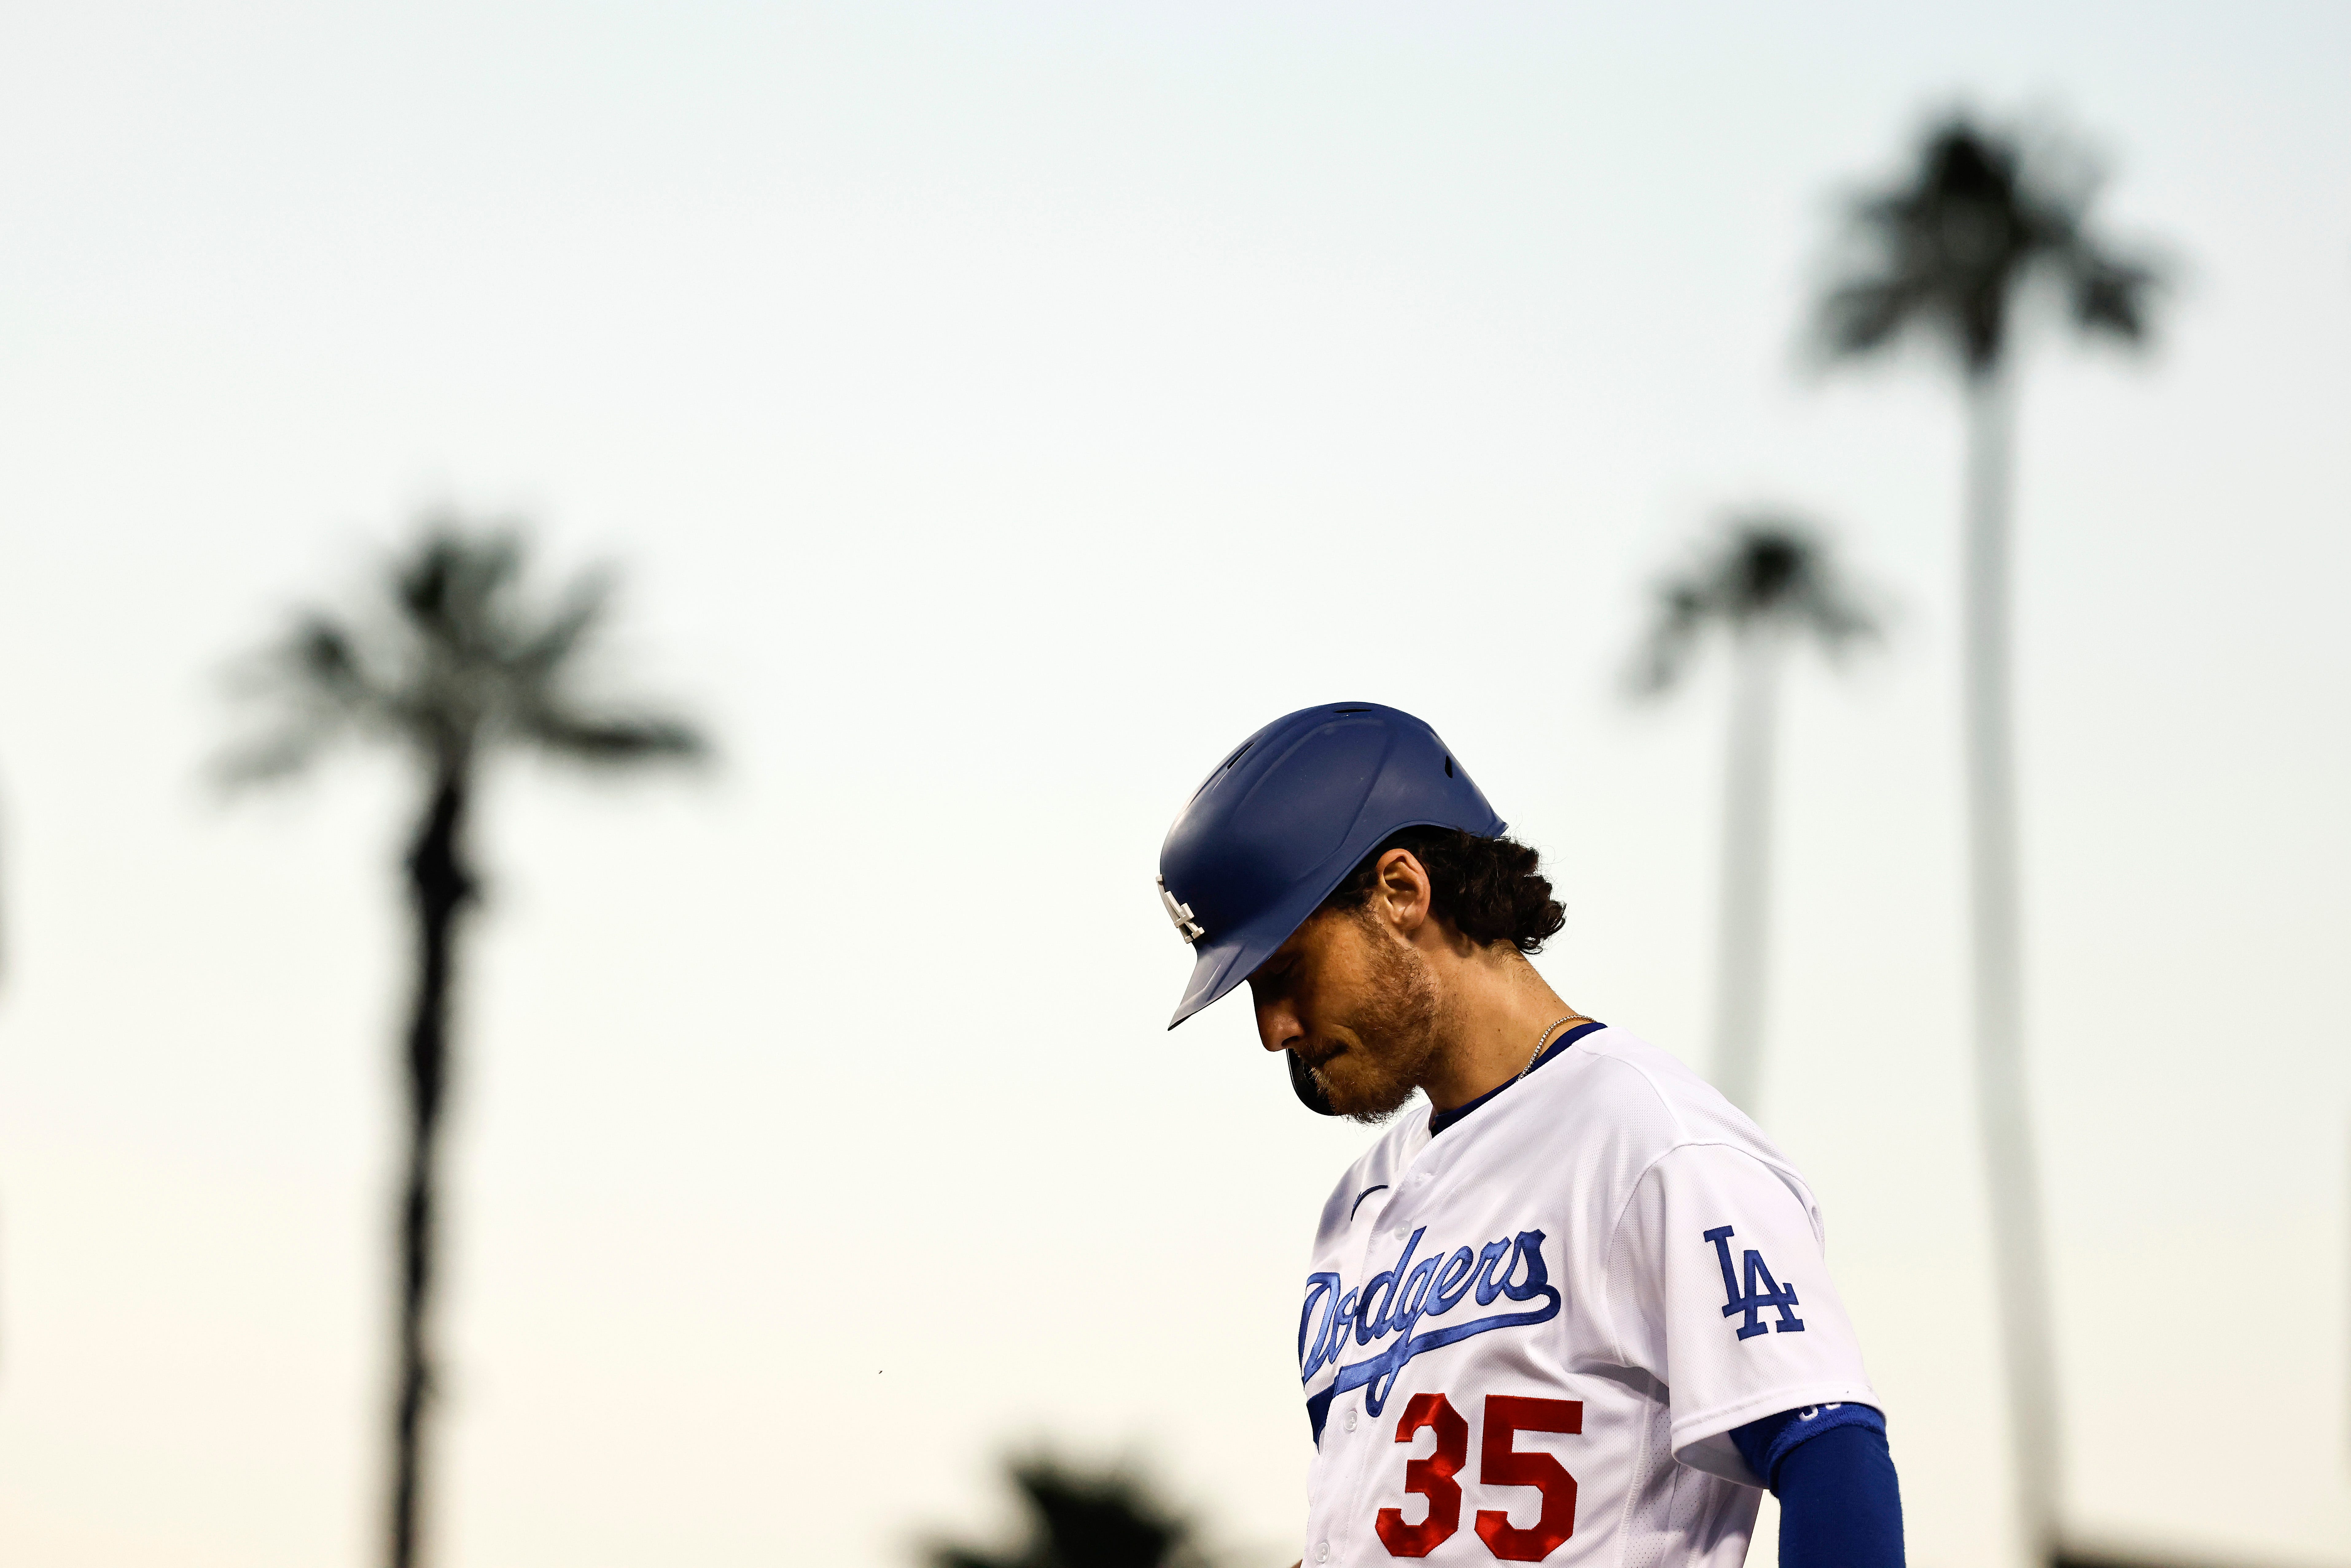 The Curious Case of Cody Bellinger - by Molly Knight